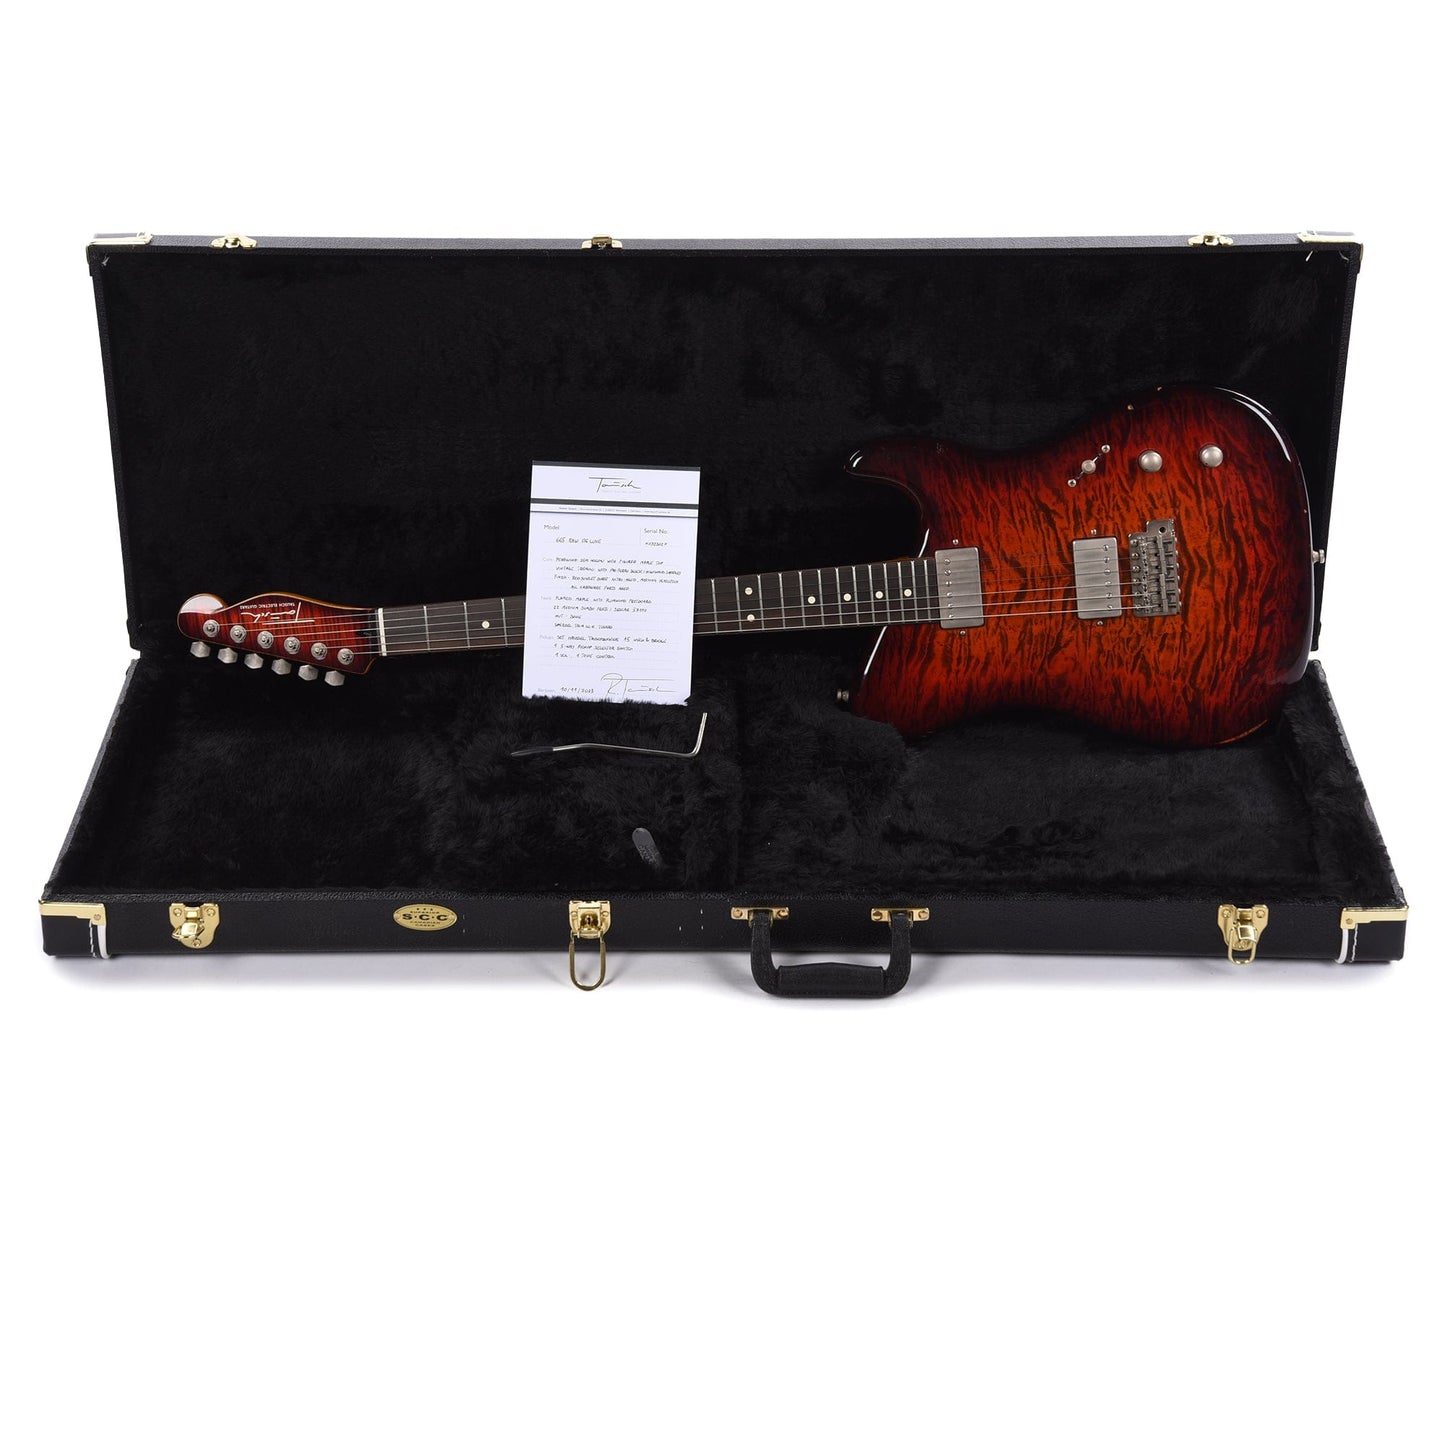 Tausch 665 RAW Deluxe Trem HH Figured Maple Aged Red Sunset Burst w/Flame Maple Neck Electric Guitars / Solid Body